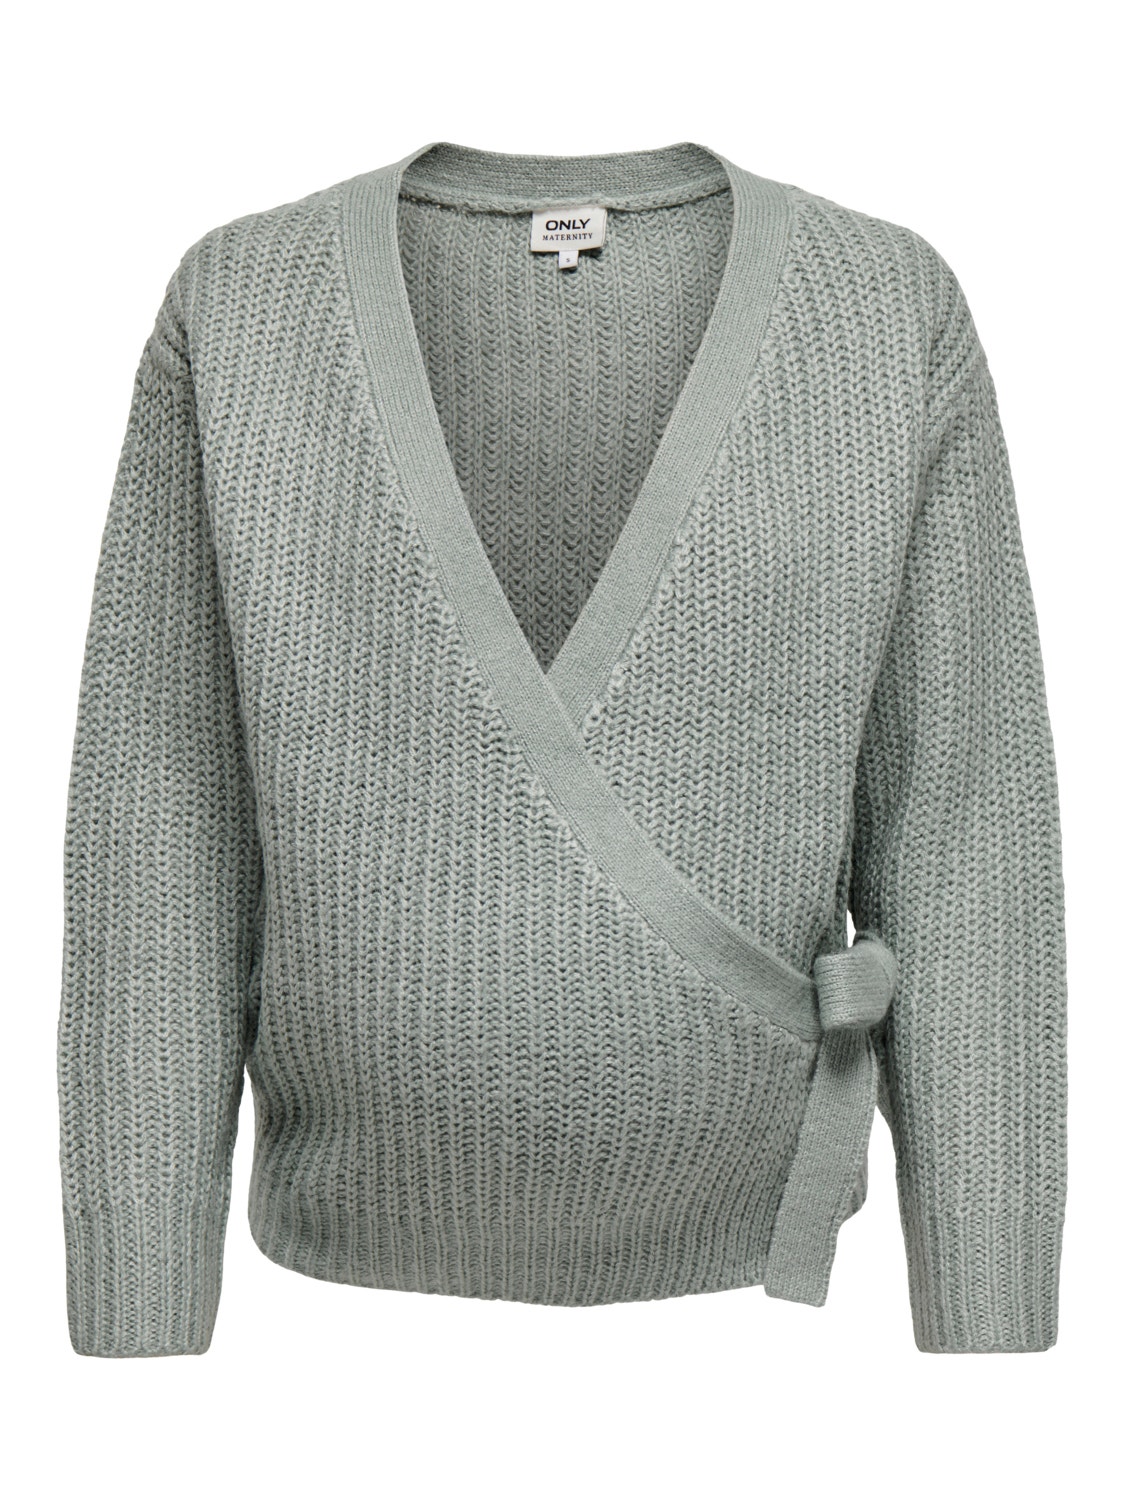 ONLY V-Neck Ribbed cuffs Knit Cardigan -Chinois Green - 15257127